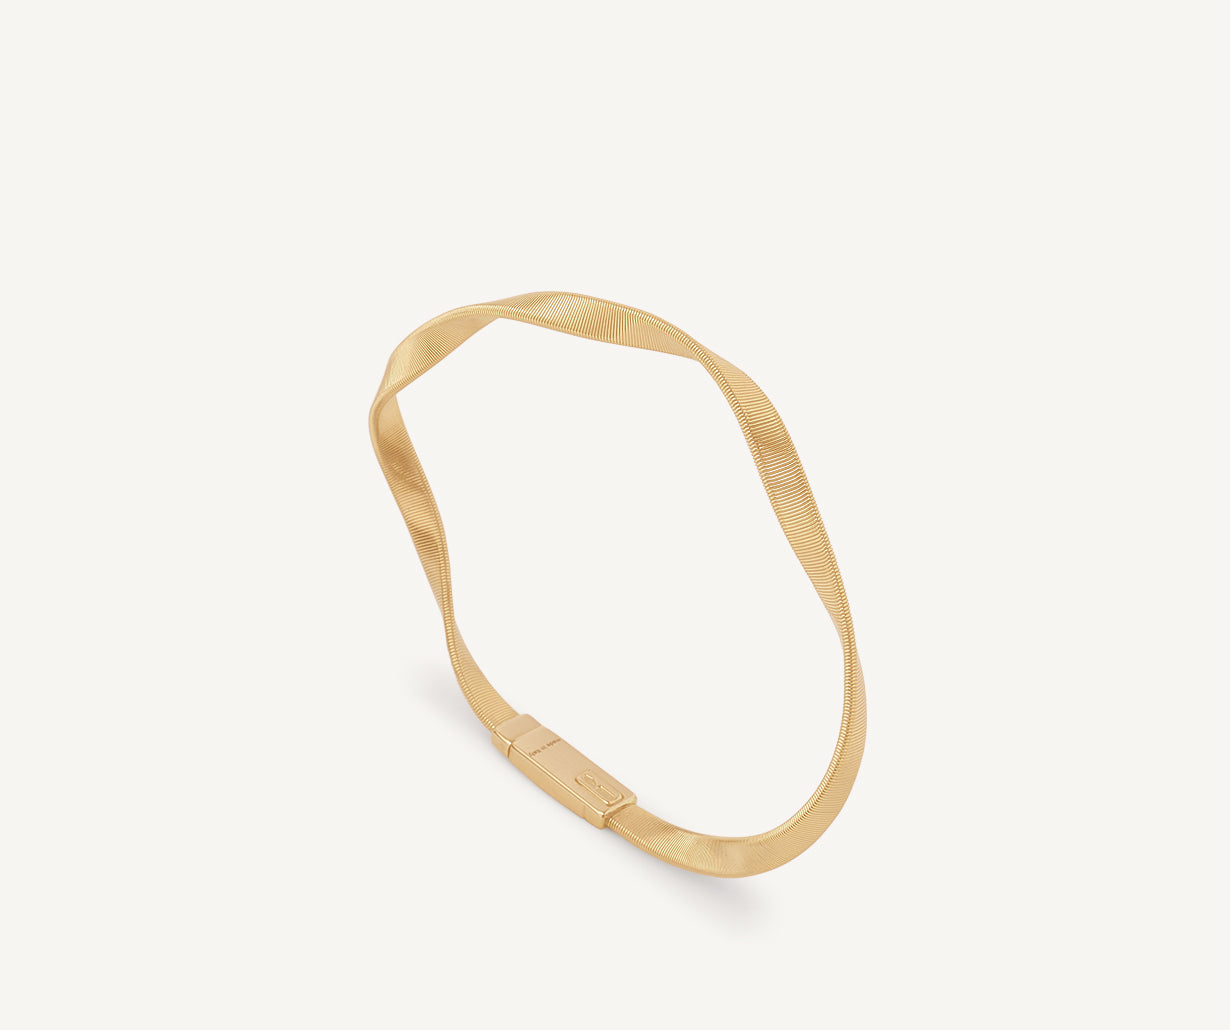 Yellow gold one strand bracelet Marrakech Supreme collection by Marco Bicego